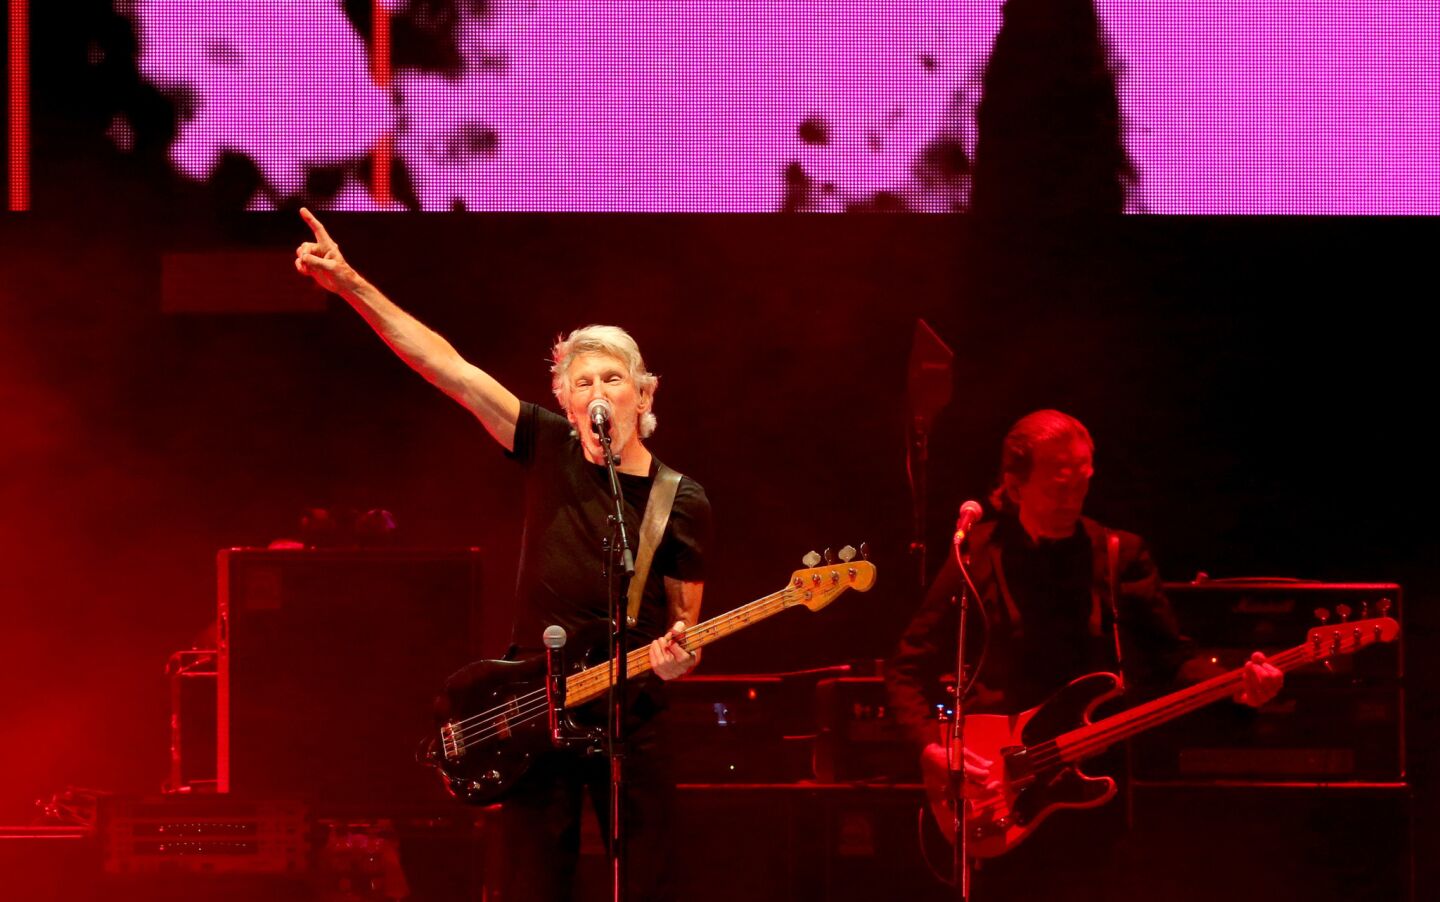 Roger Waters' Oct 16 performance closes out the second weekend of the Desert Trip festival in Indio, Calif.